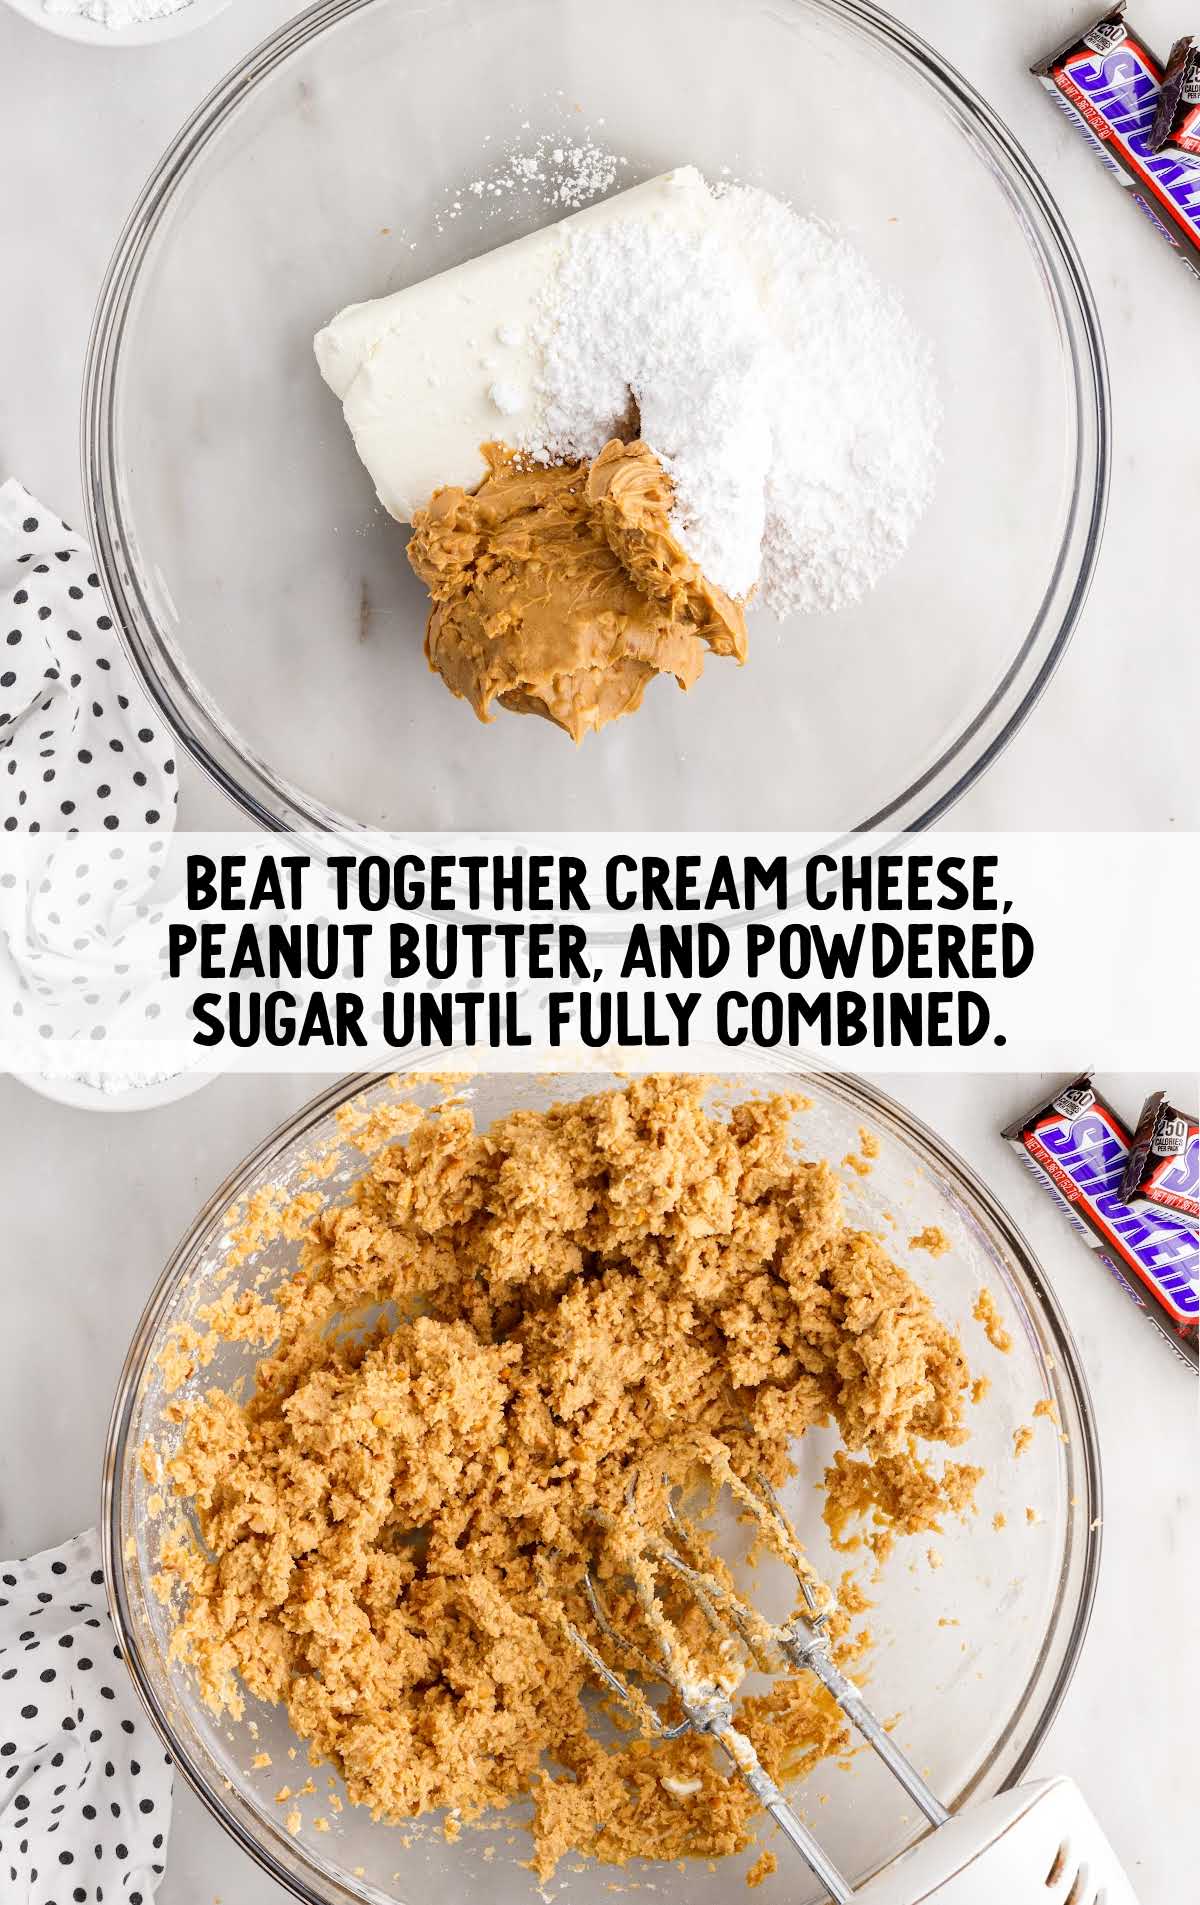 cream cheese, peanut butter, and powdered sugar combined in a bowl